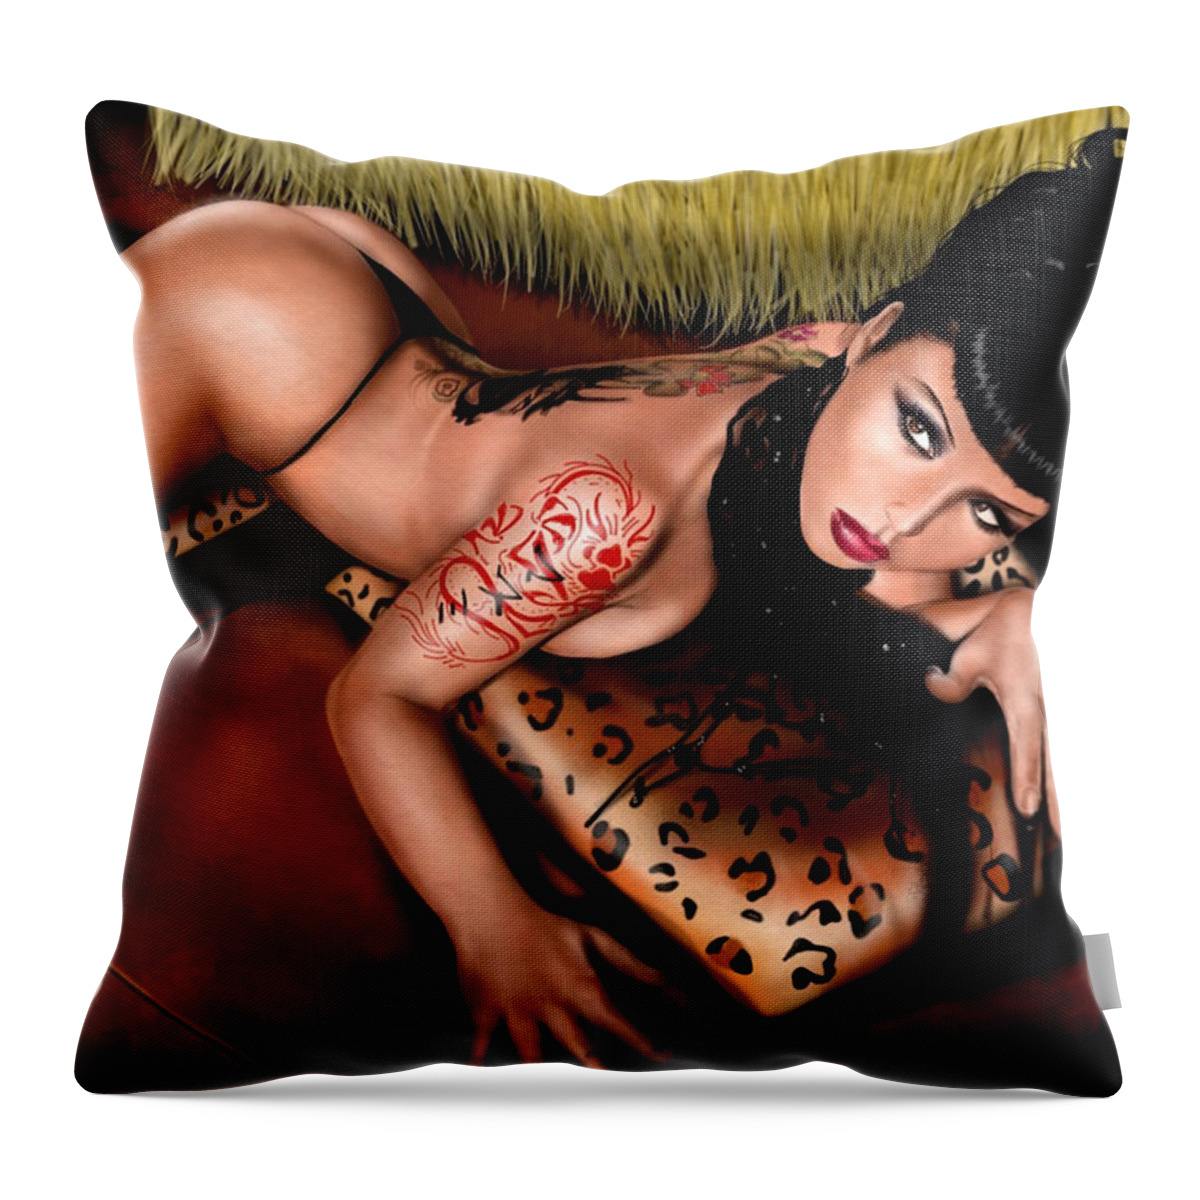 Pete Throw Pillow featuring the painting Pillow Talk by Pete Tapang